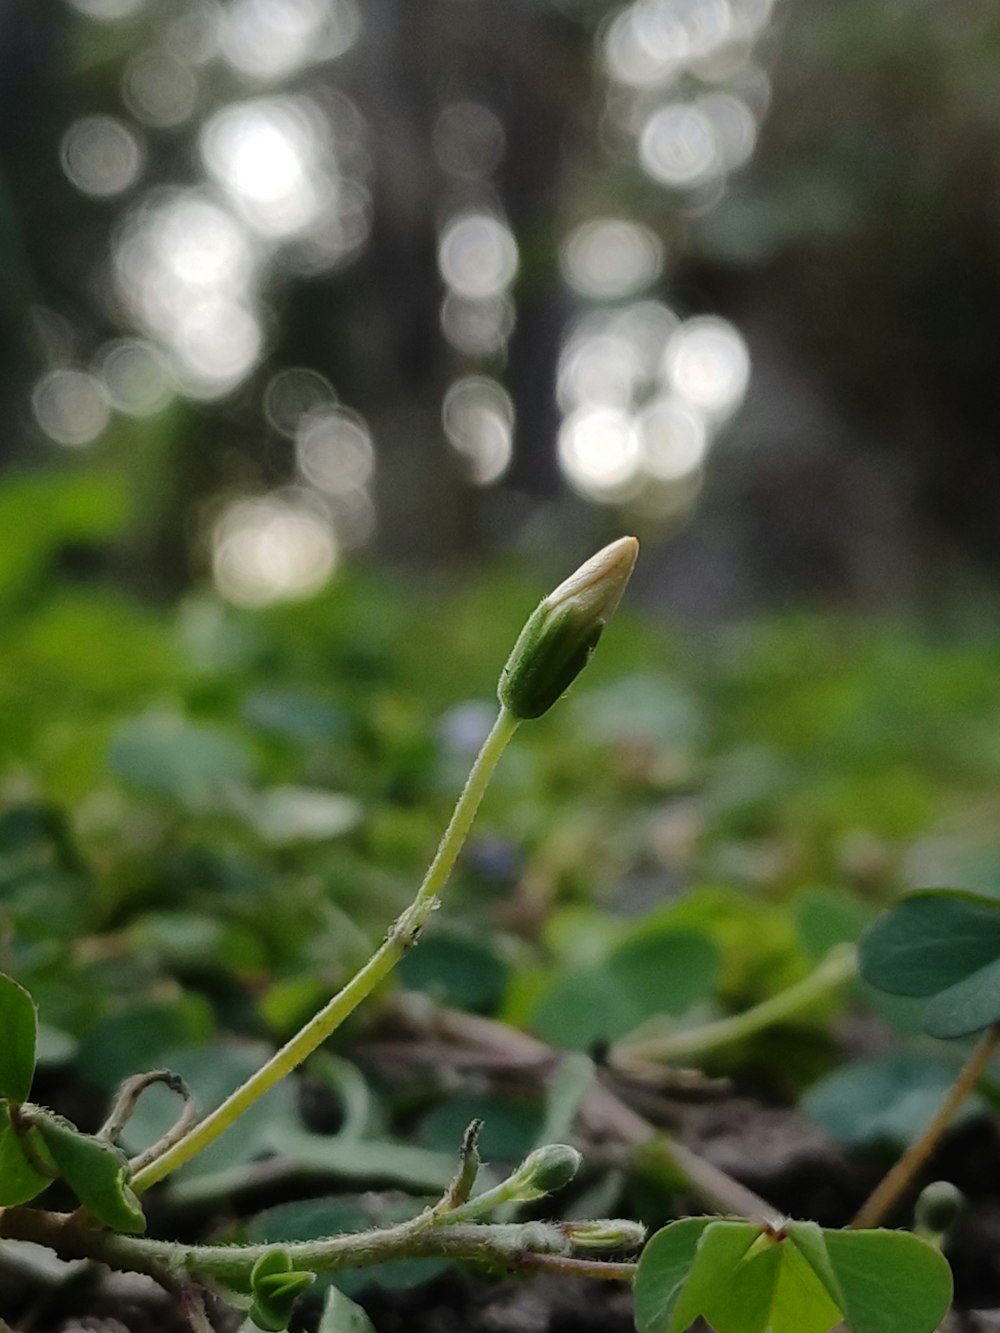 a single flower bud on a plant in a forest